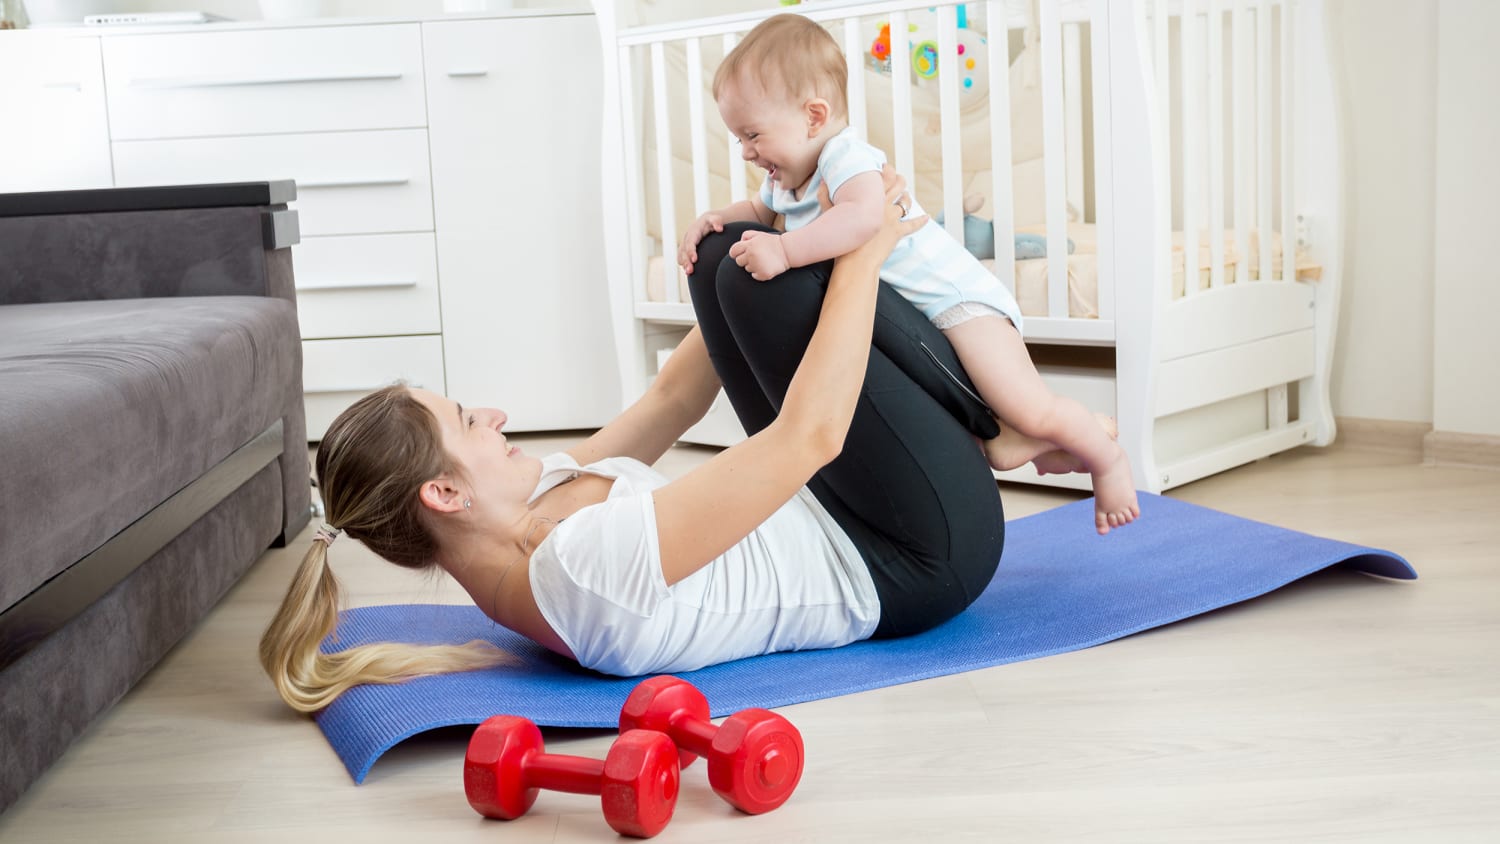 Post-pregnancy workout: 5 exercises to help strengthen your core